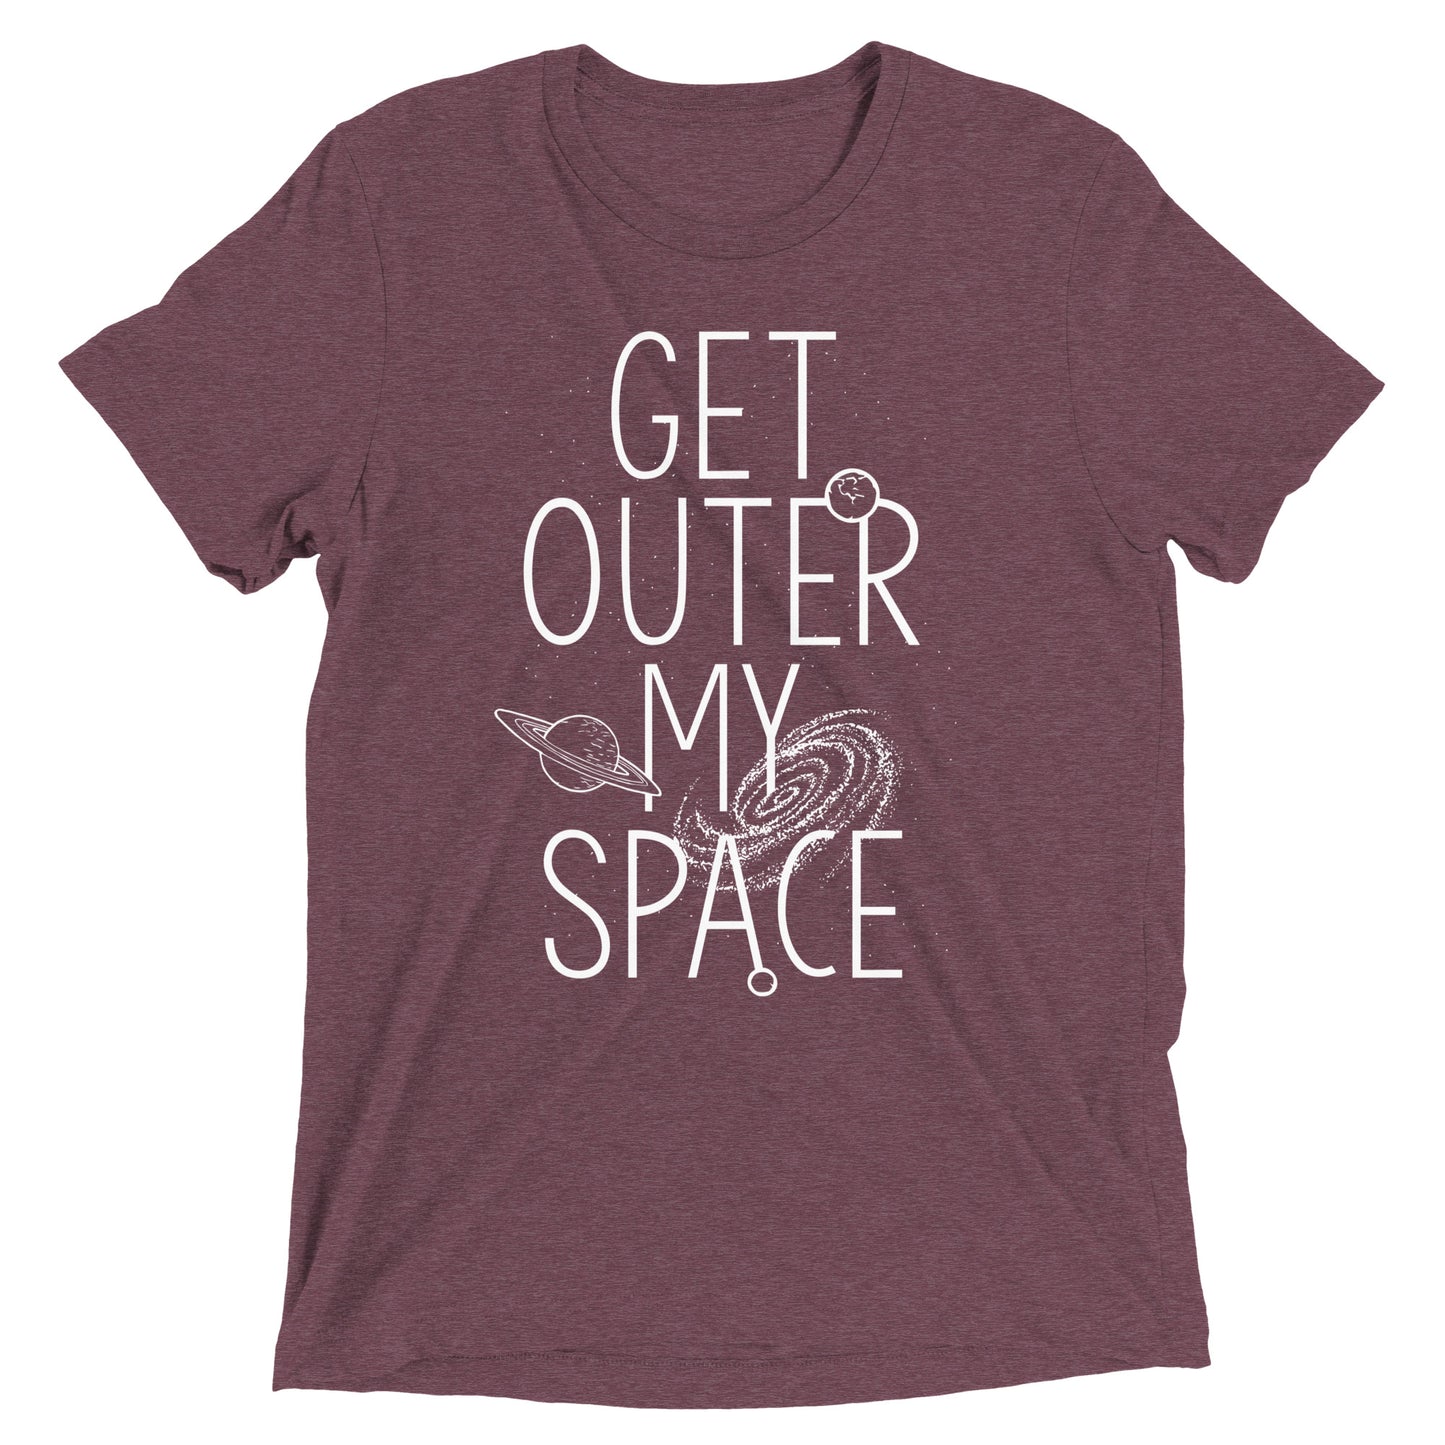 Get Outer My Space Men's Tri-Blend Tee